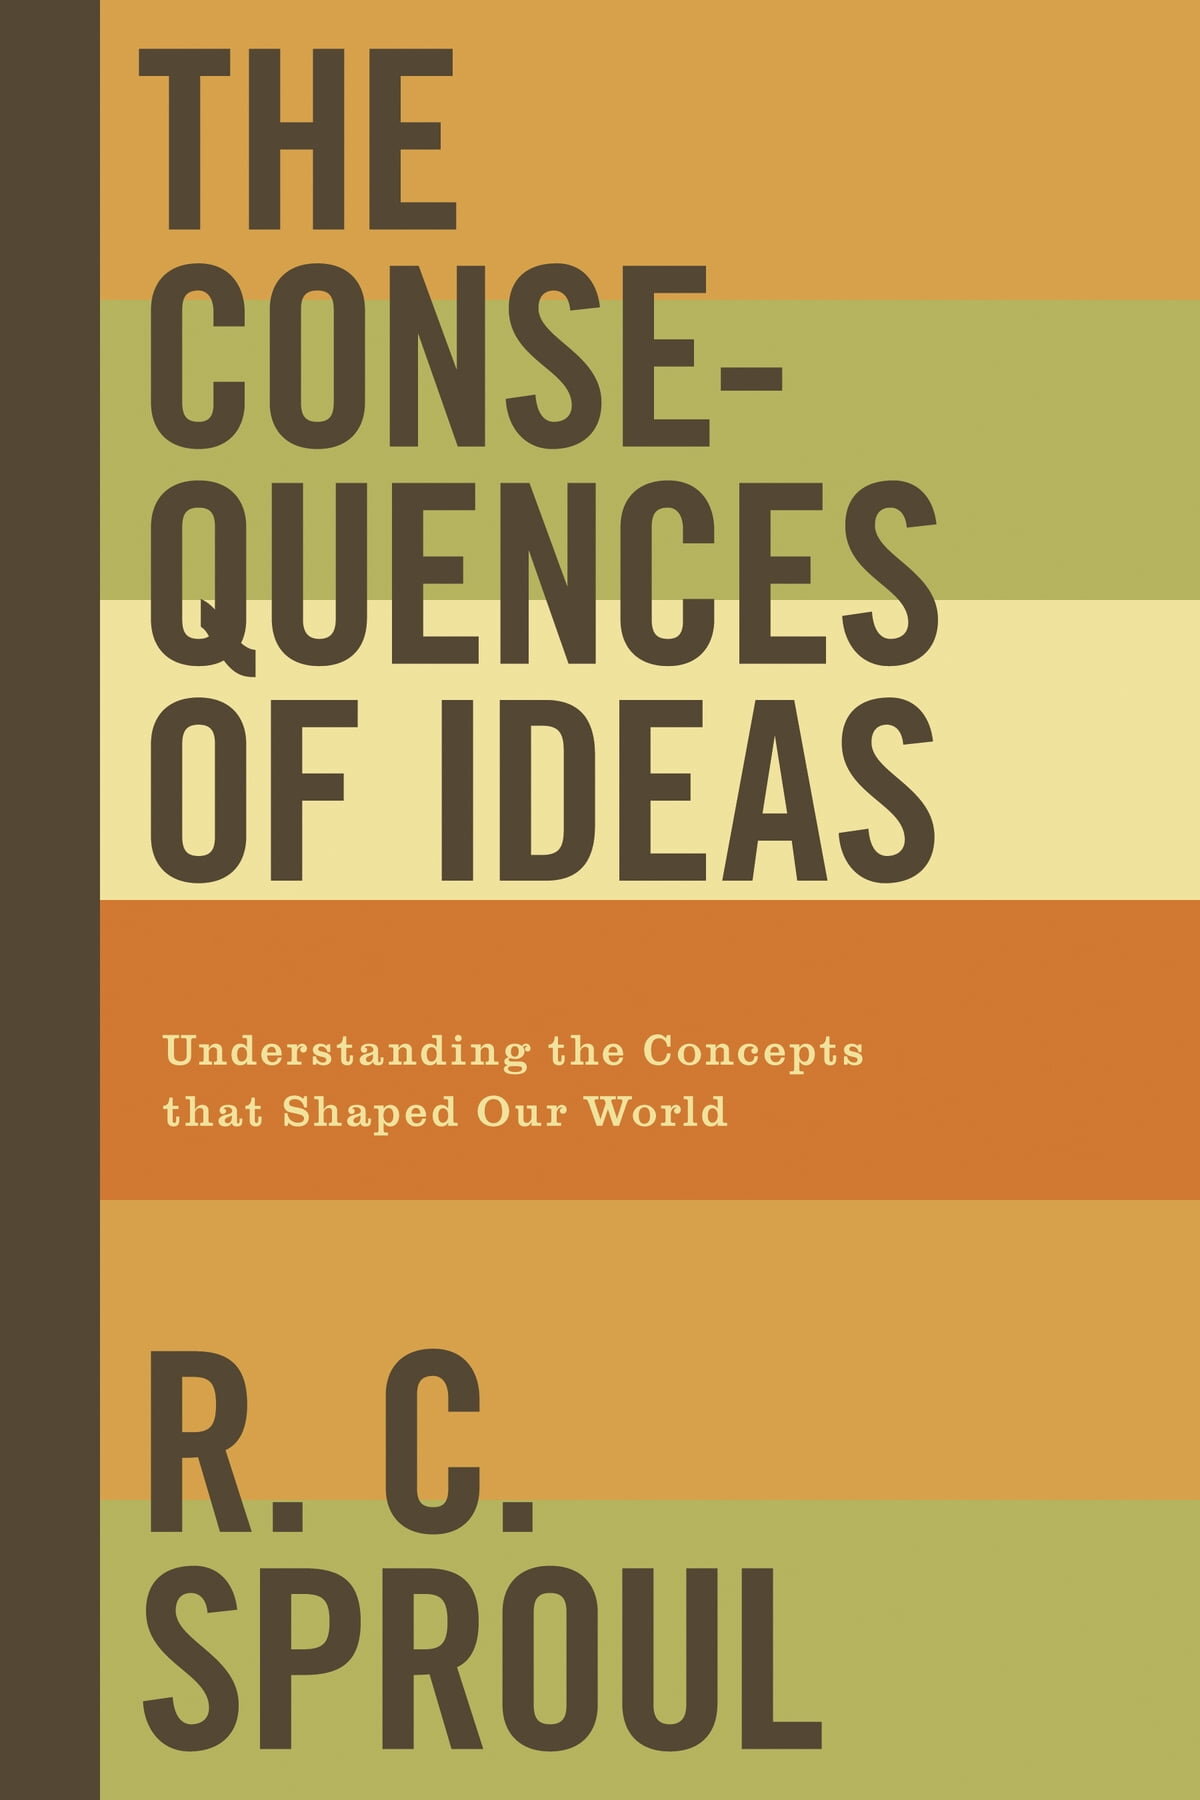 The Consequences of Ideas: Understanding the Concepts that Shaped Our World